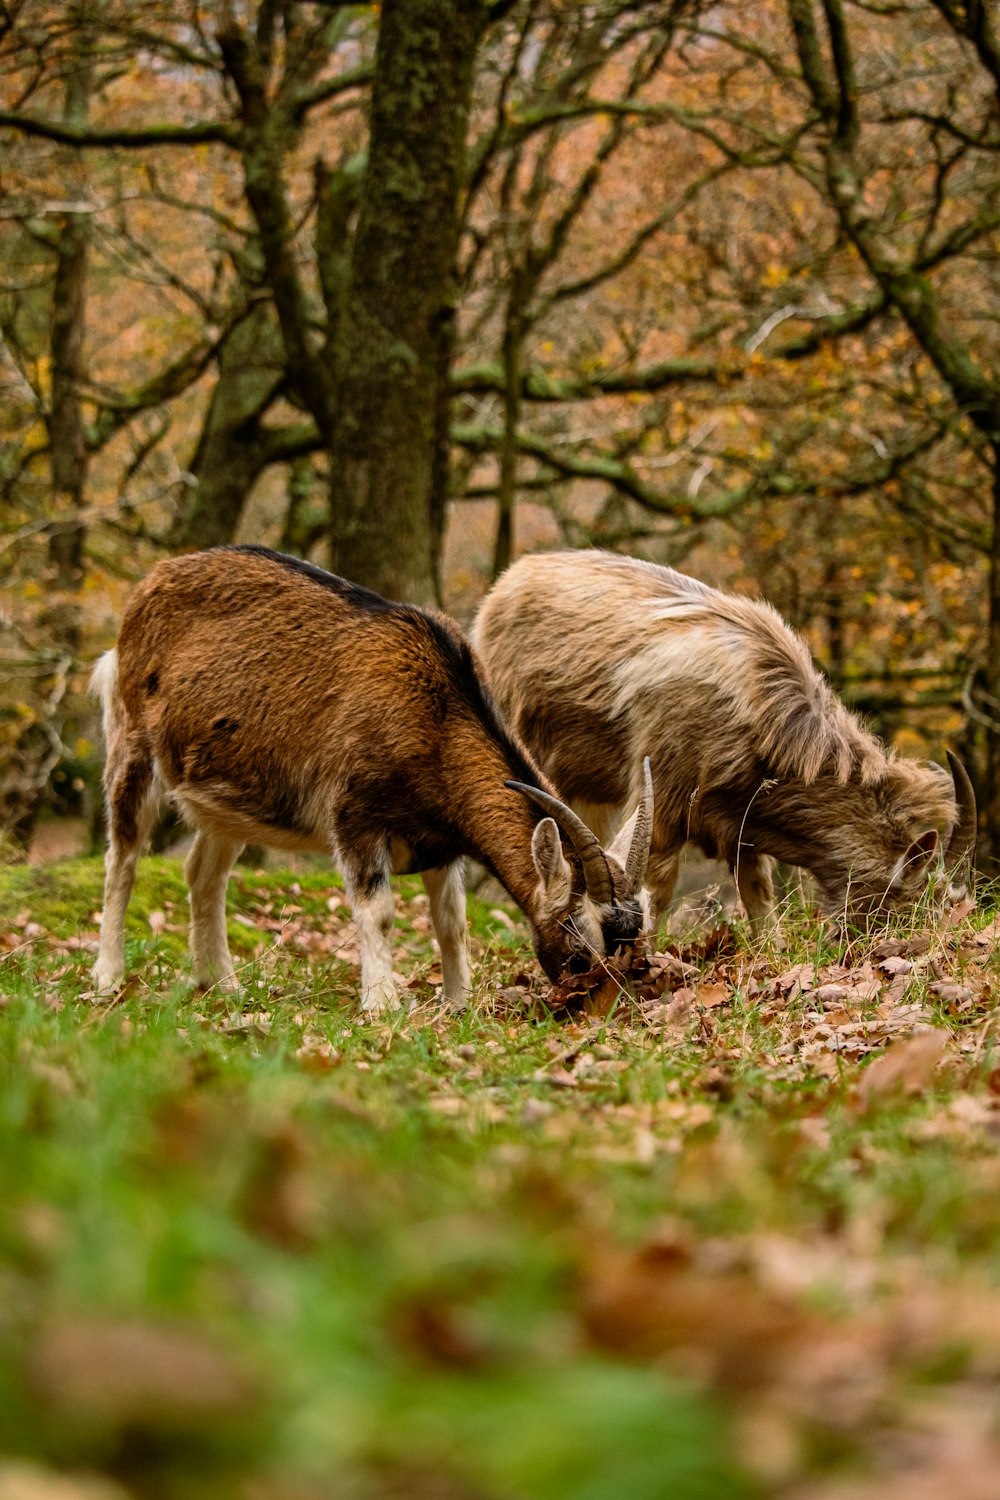 two goats eating grass in a wooded area